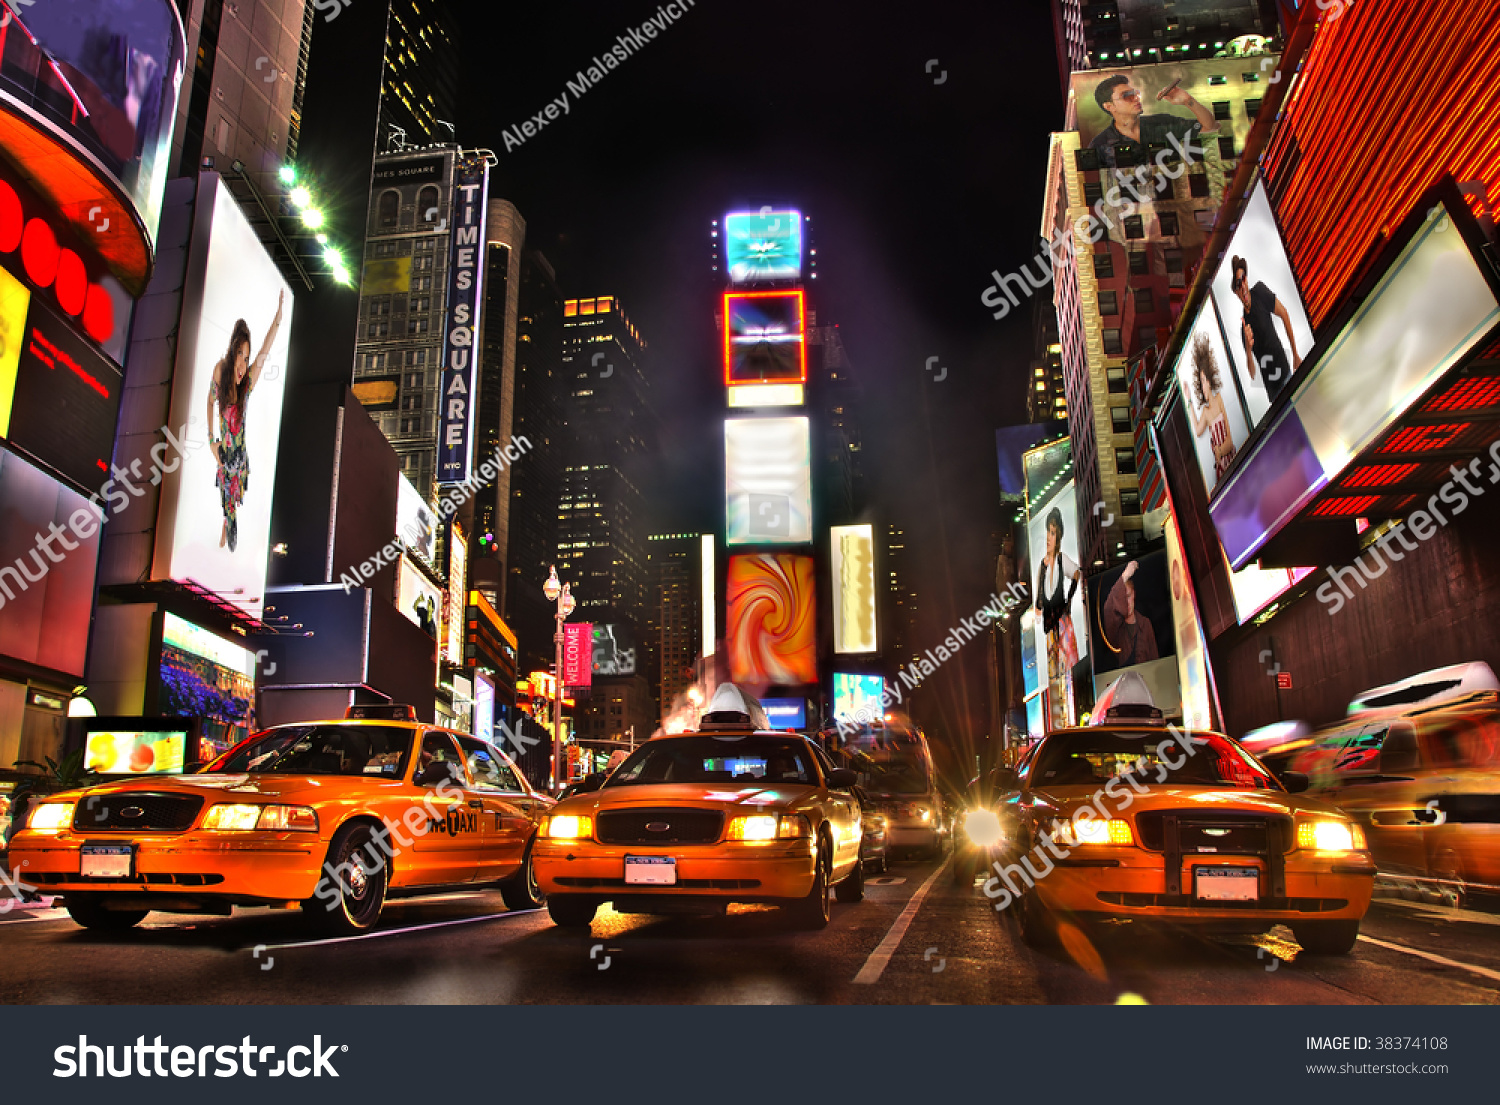 New York Times Square At Night. All logos and trademarks are obscured.  I am the copyright holder of all photos/art composed into the image. #38374108